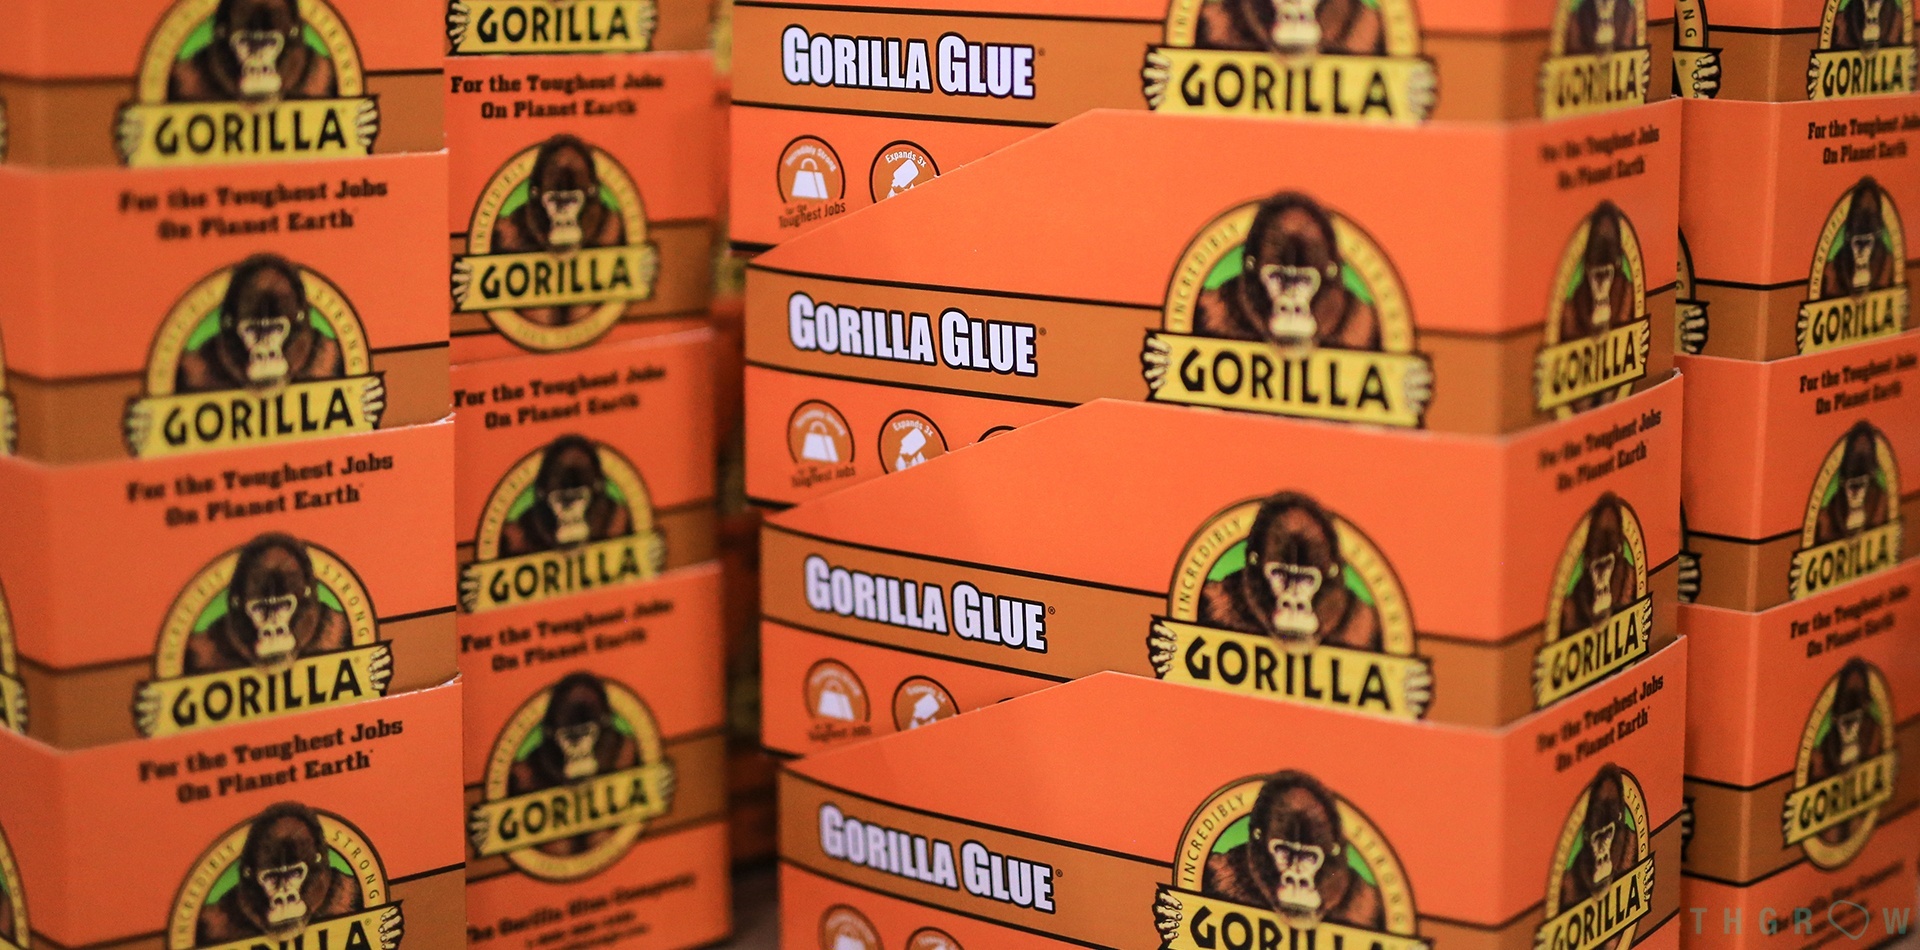 Gorilla Glue #4: one of the most potent crossbreeds